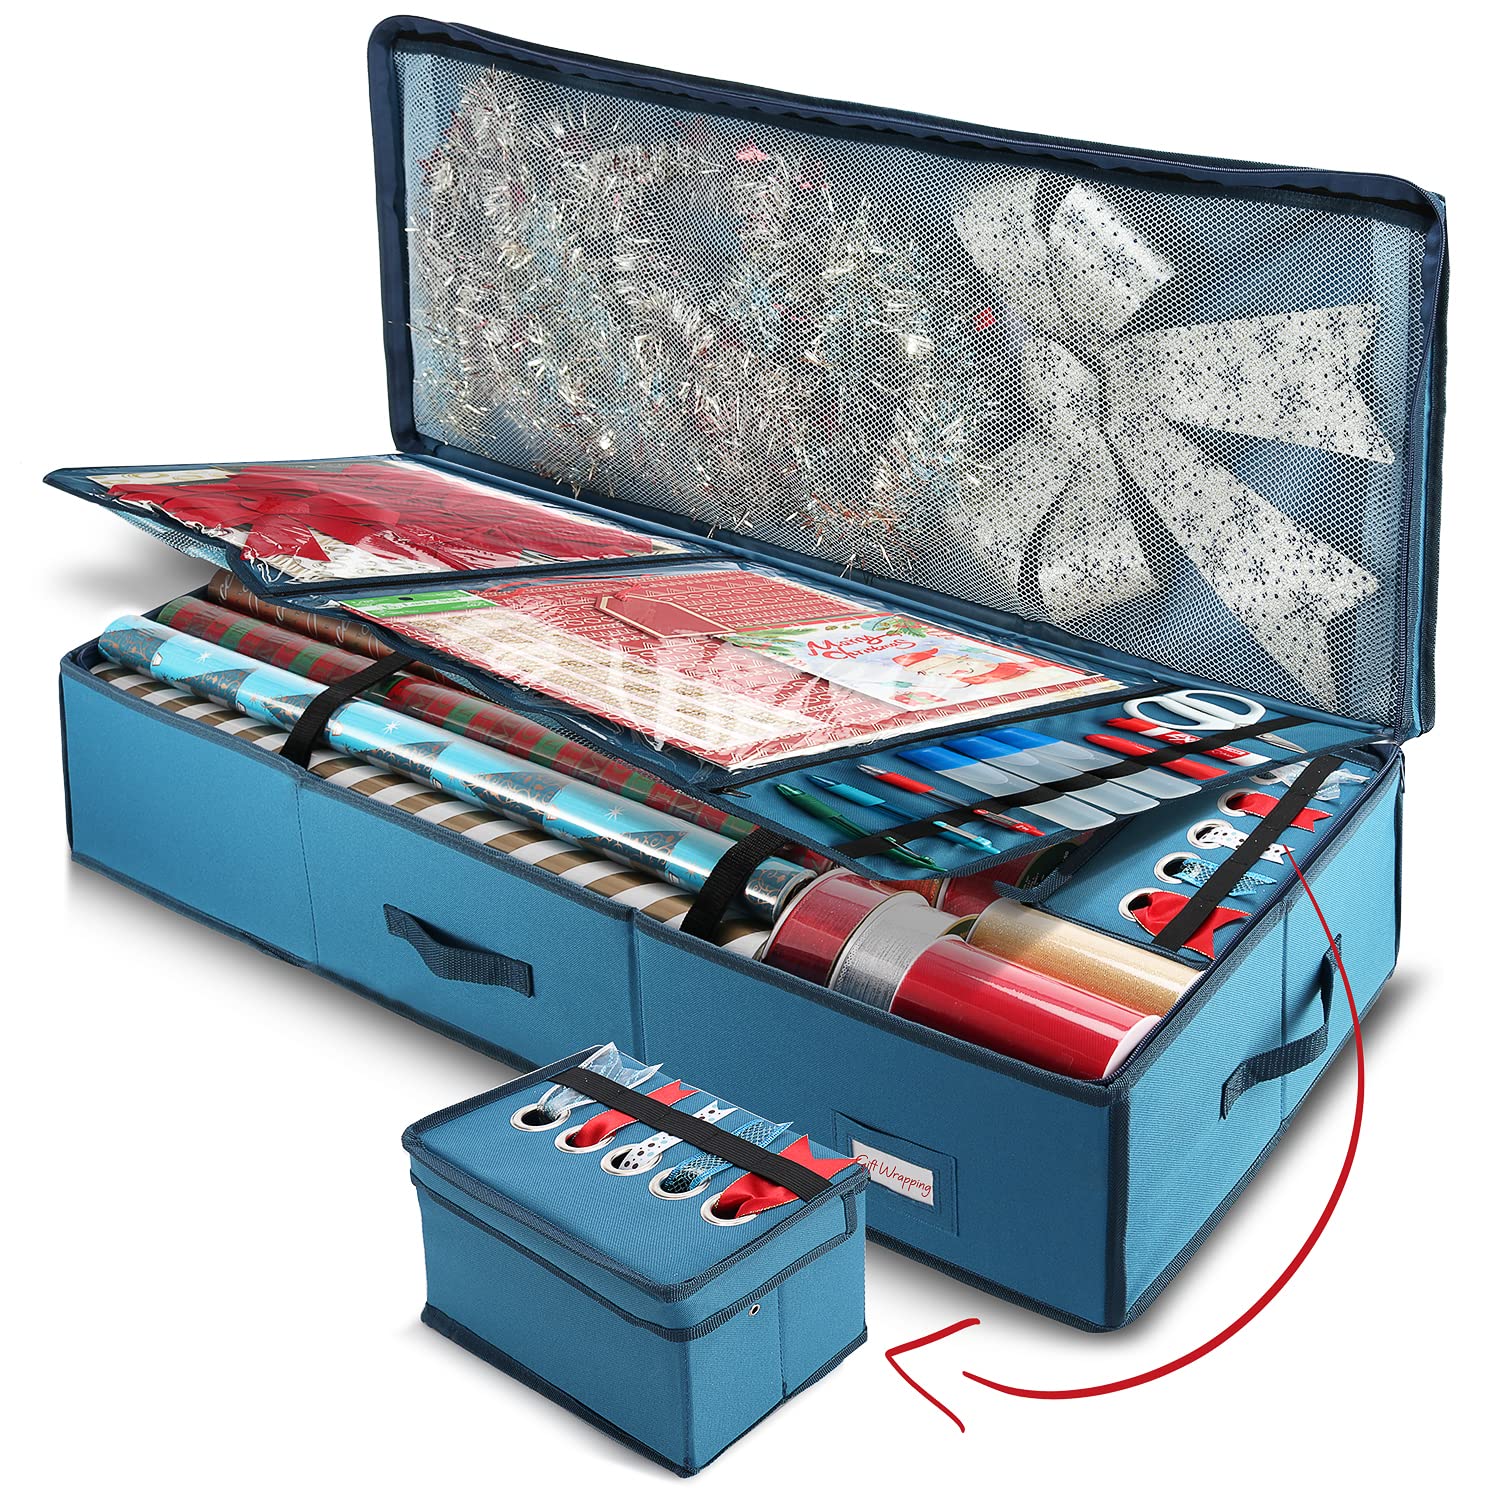 Hearth & Harbor Wrapping Paper Storage Organizer Container - Christmas Wrapping Paper Rolls Storage, Under-Bed Storage Box for Holiday Storage & Accessories - Gift Wrap Storage Organizer Box